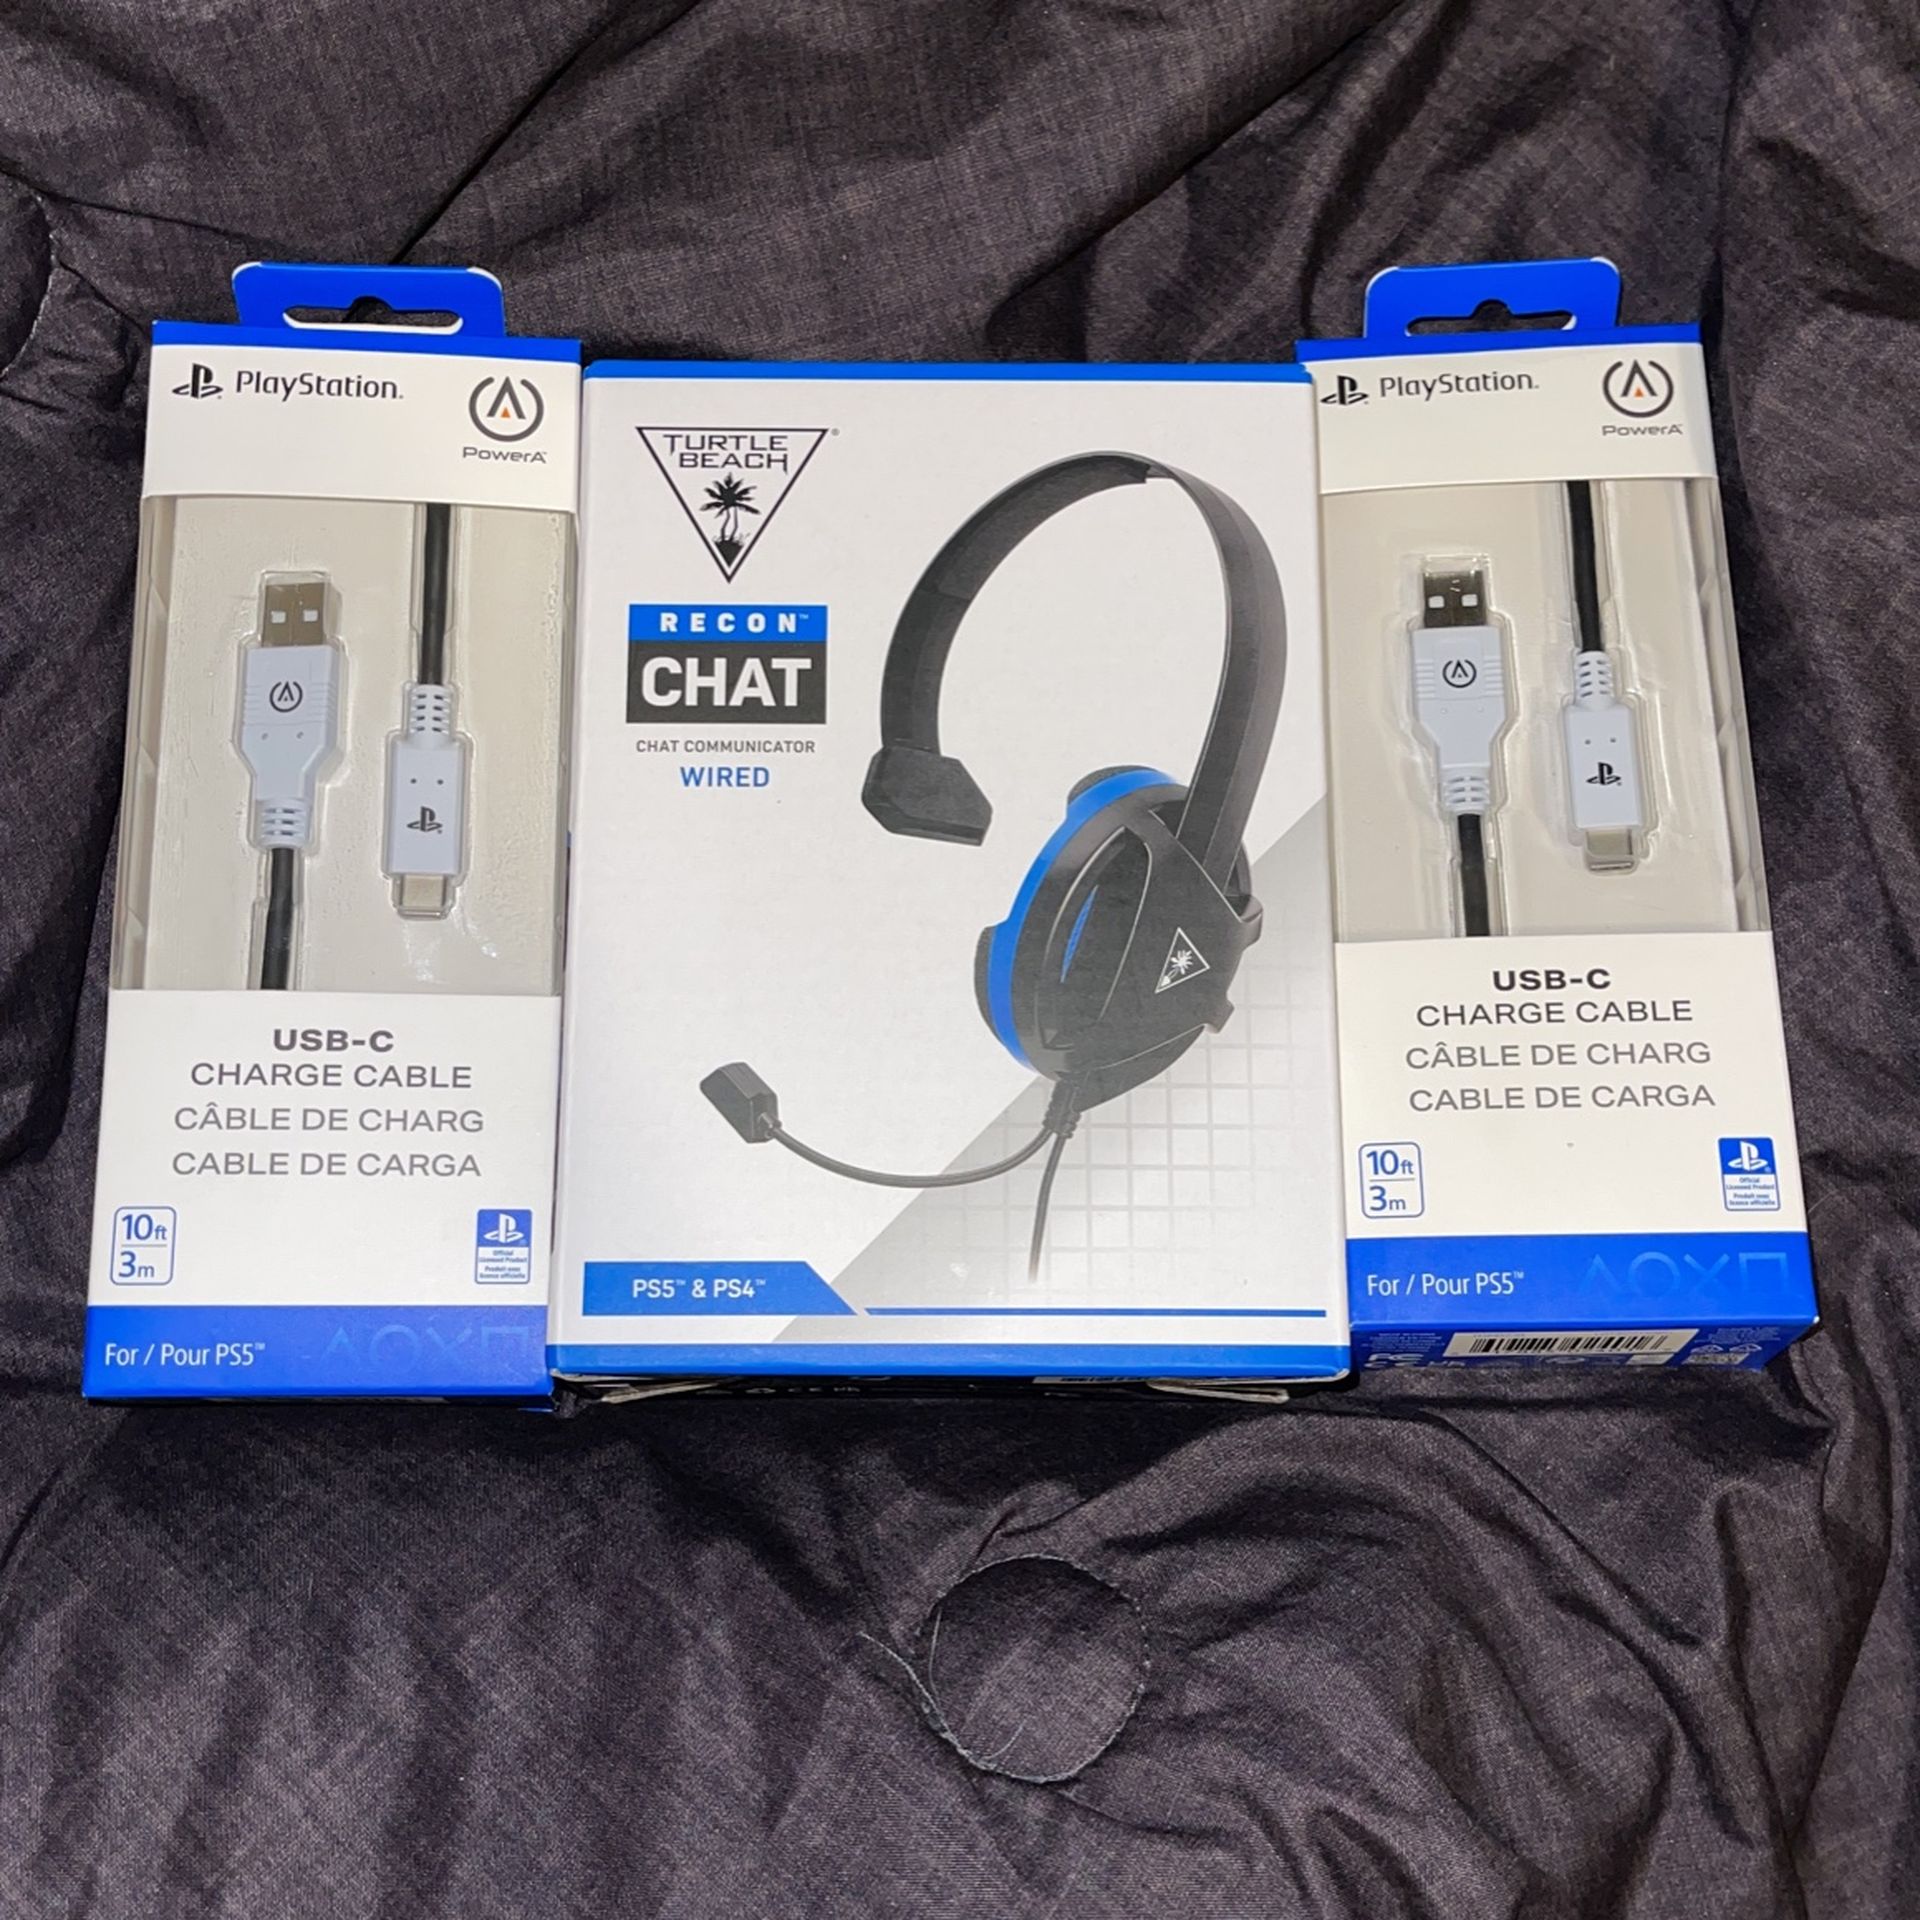 Playstation USB-C charge cable and Turtle Beach Gaming Head Set